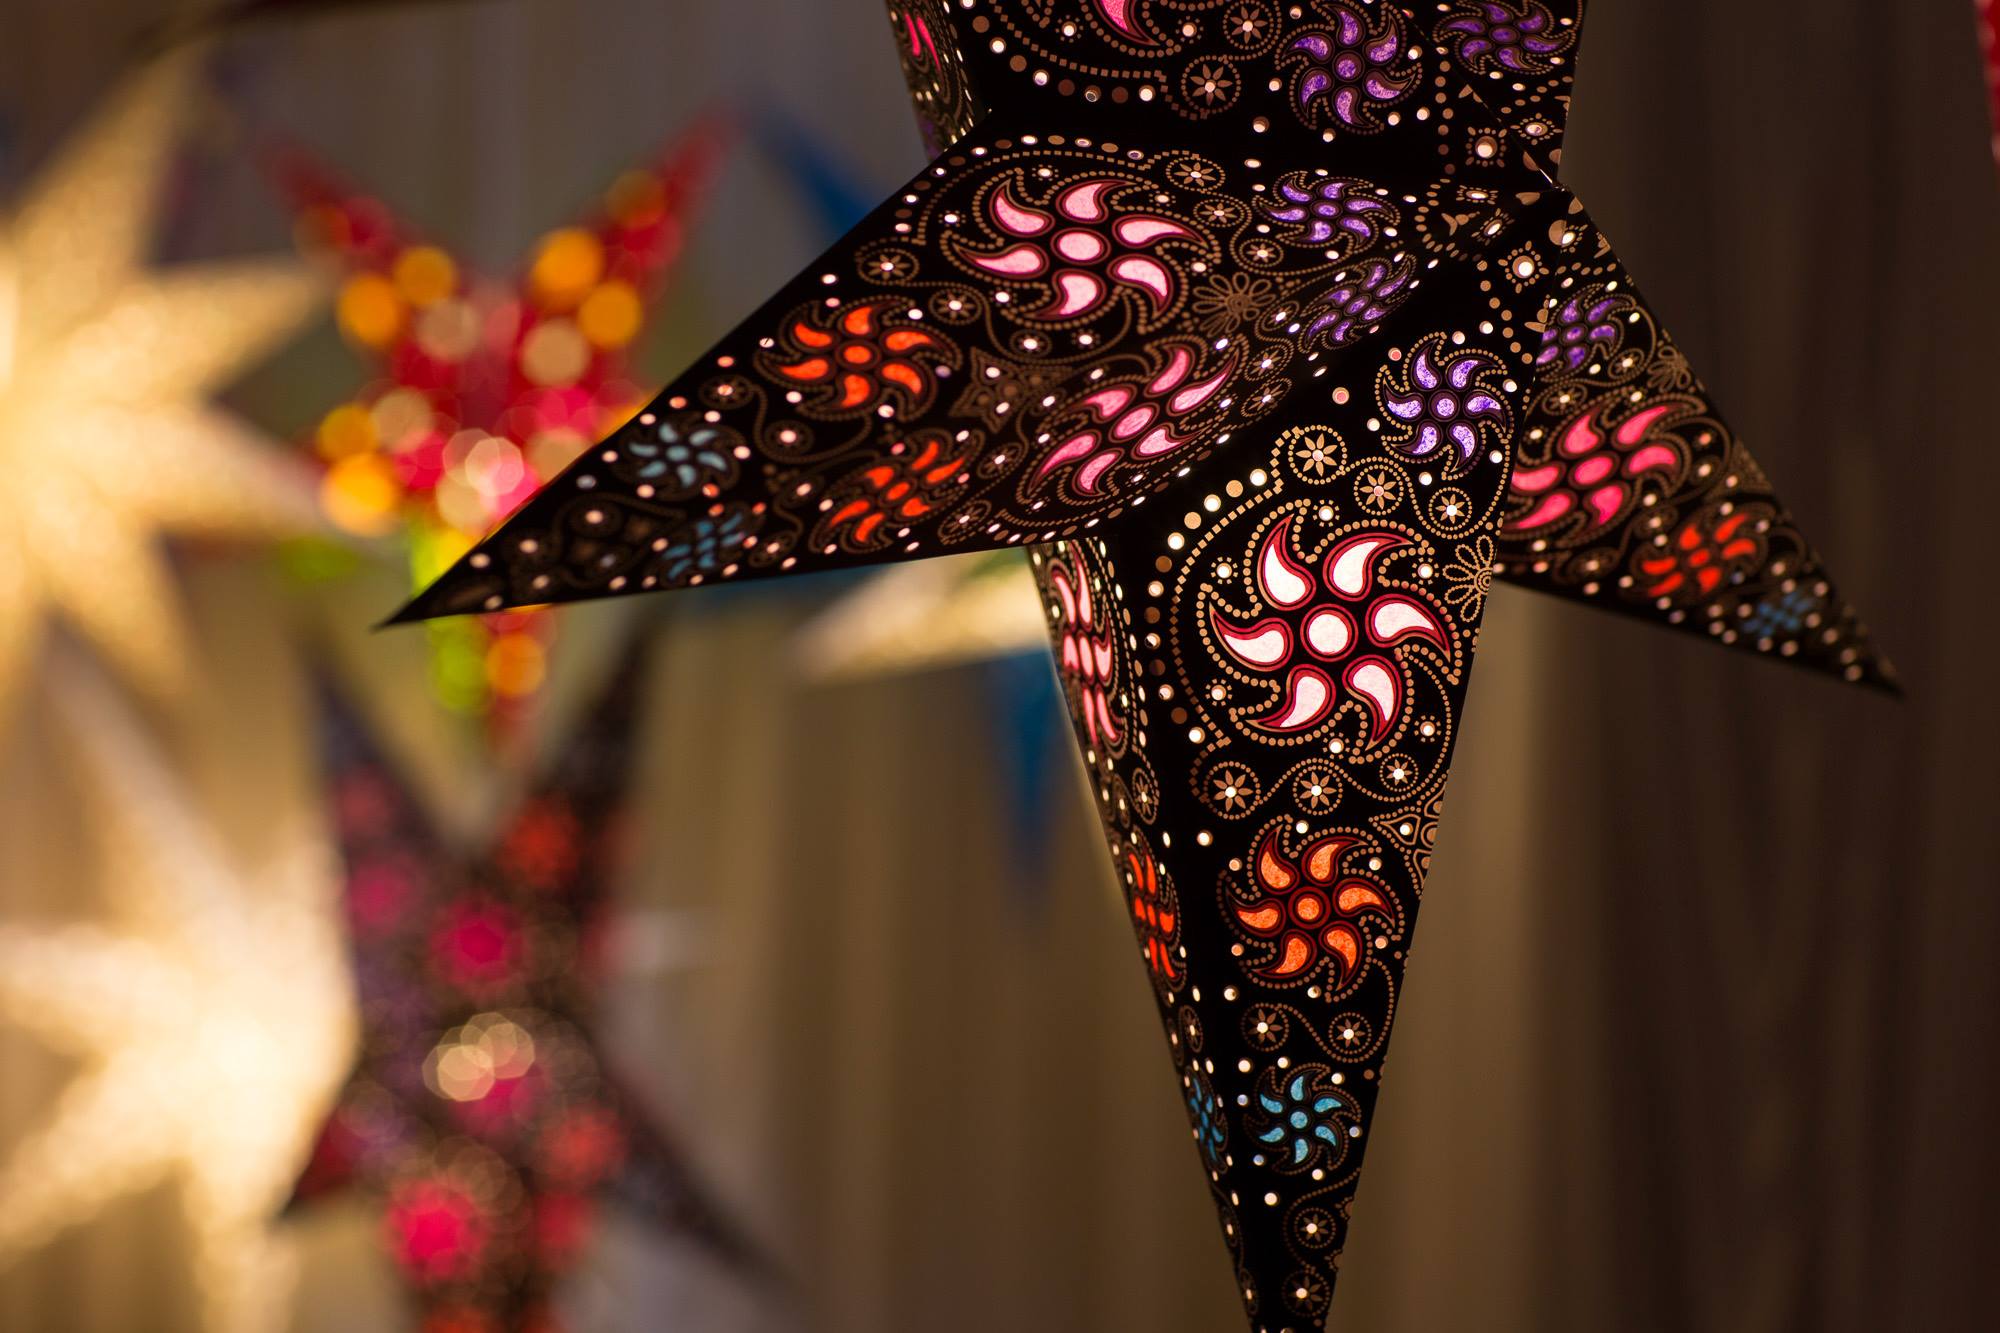 New USB LED Star Light: Create Enchanting Ambiance in Your Home